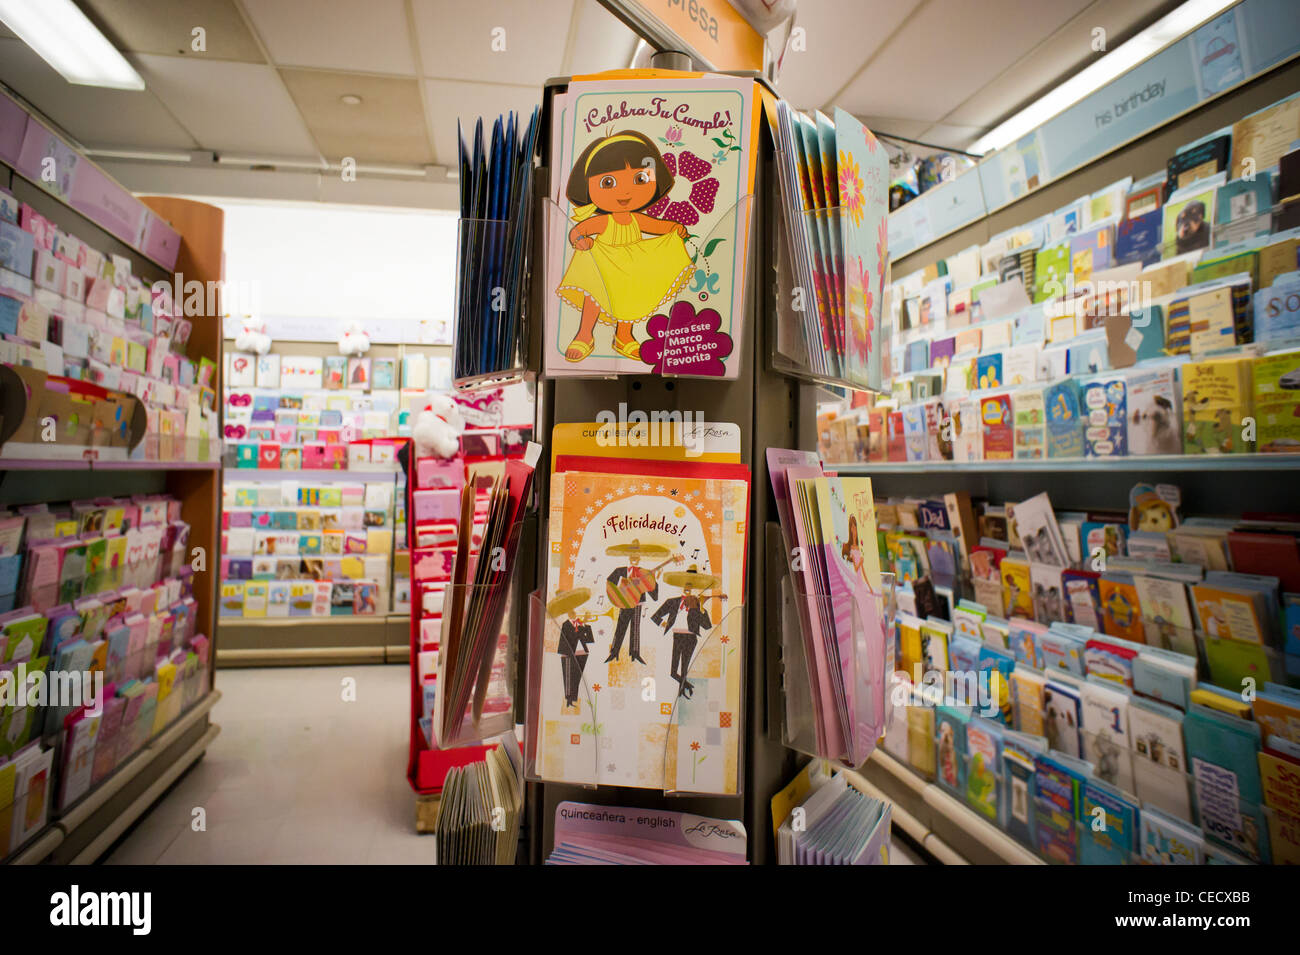 Spanish language greeting cards are seen in a a display in a store in New York Stock Photo